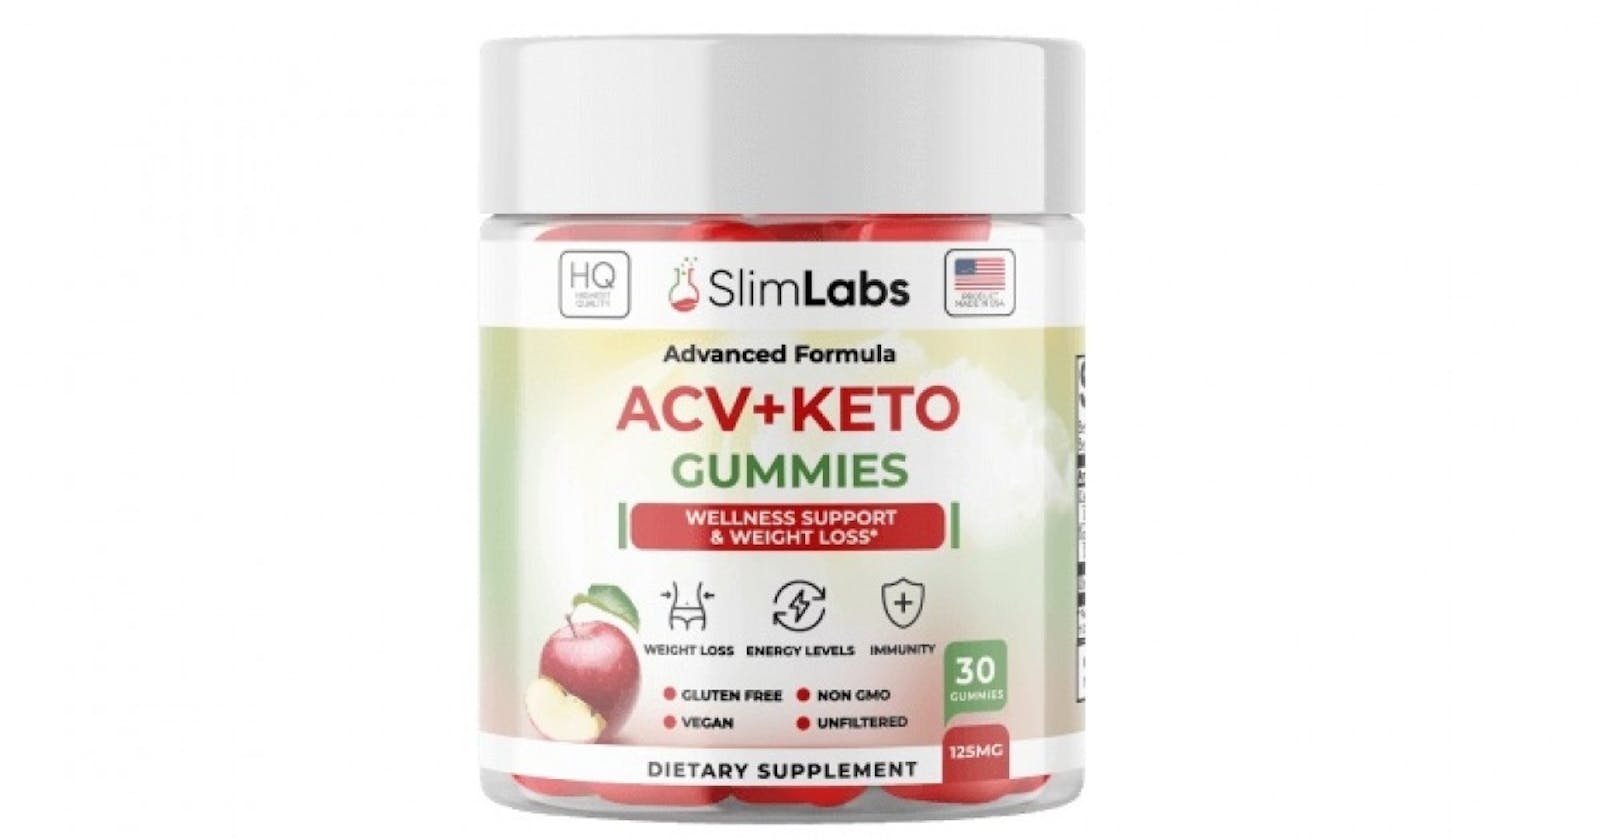 What are the benefits of Platinum Label Keto ACV Gummies and is it safe to use?